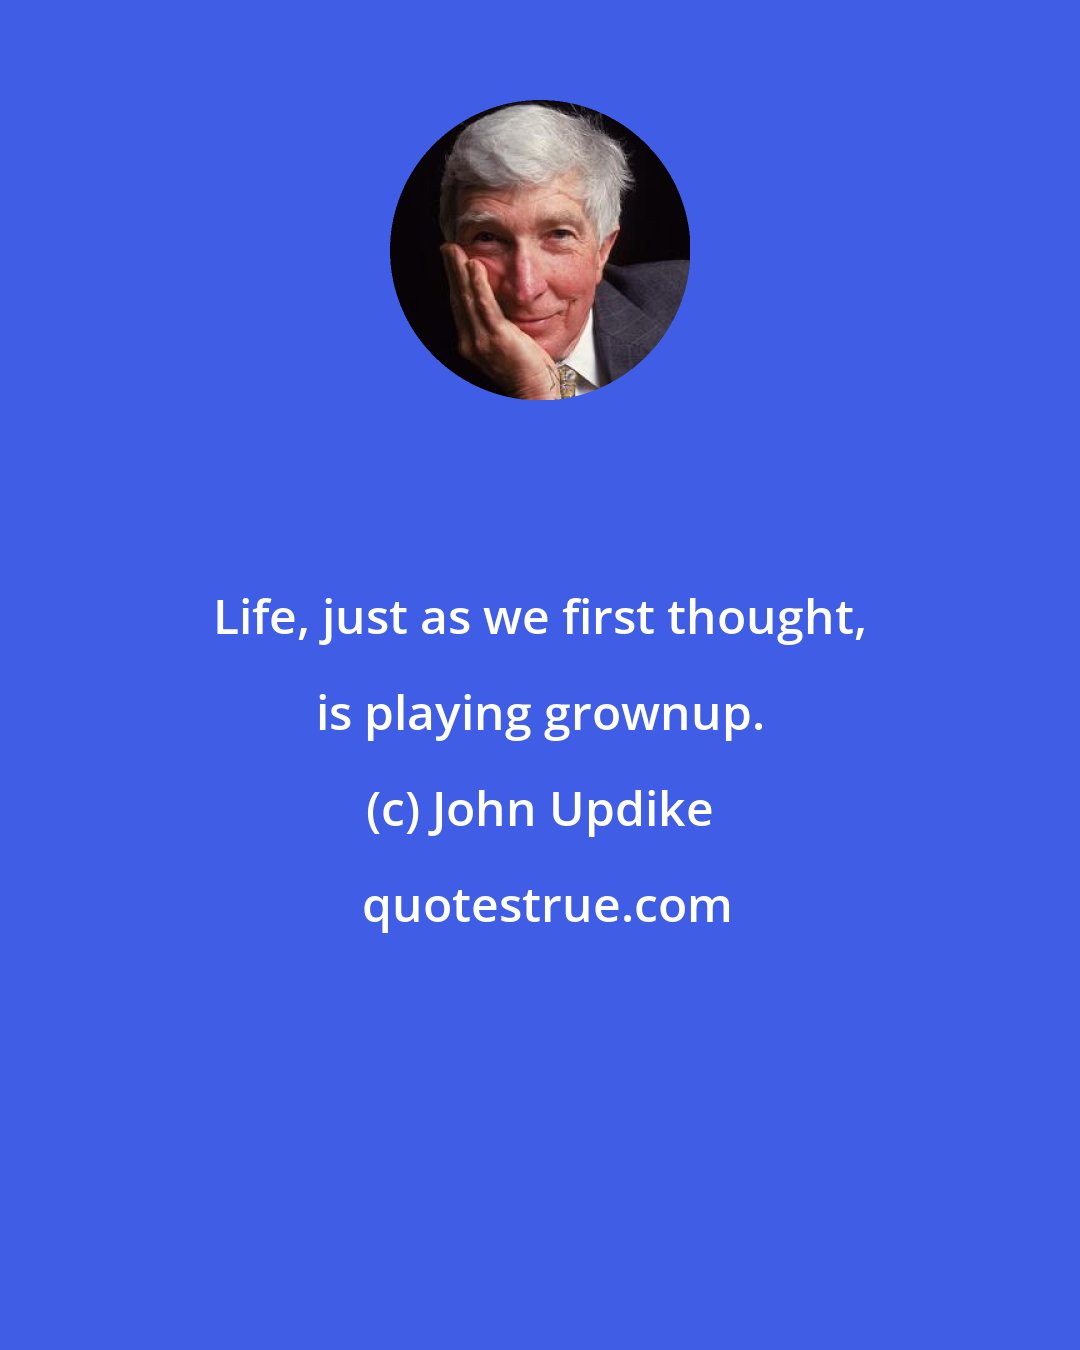 John Updike: Life, just as we first thought, is playing grownup.